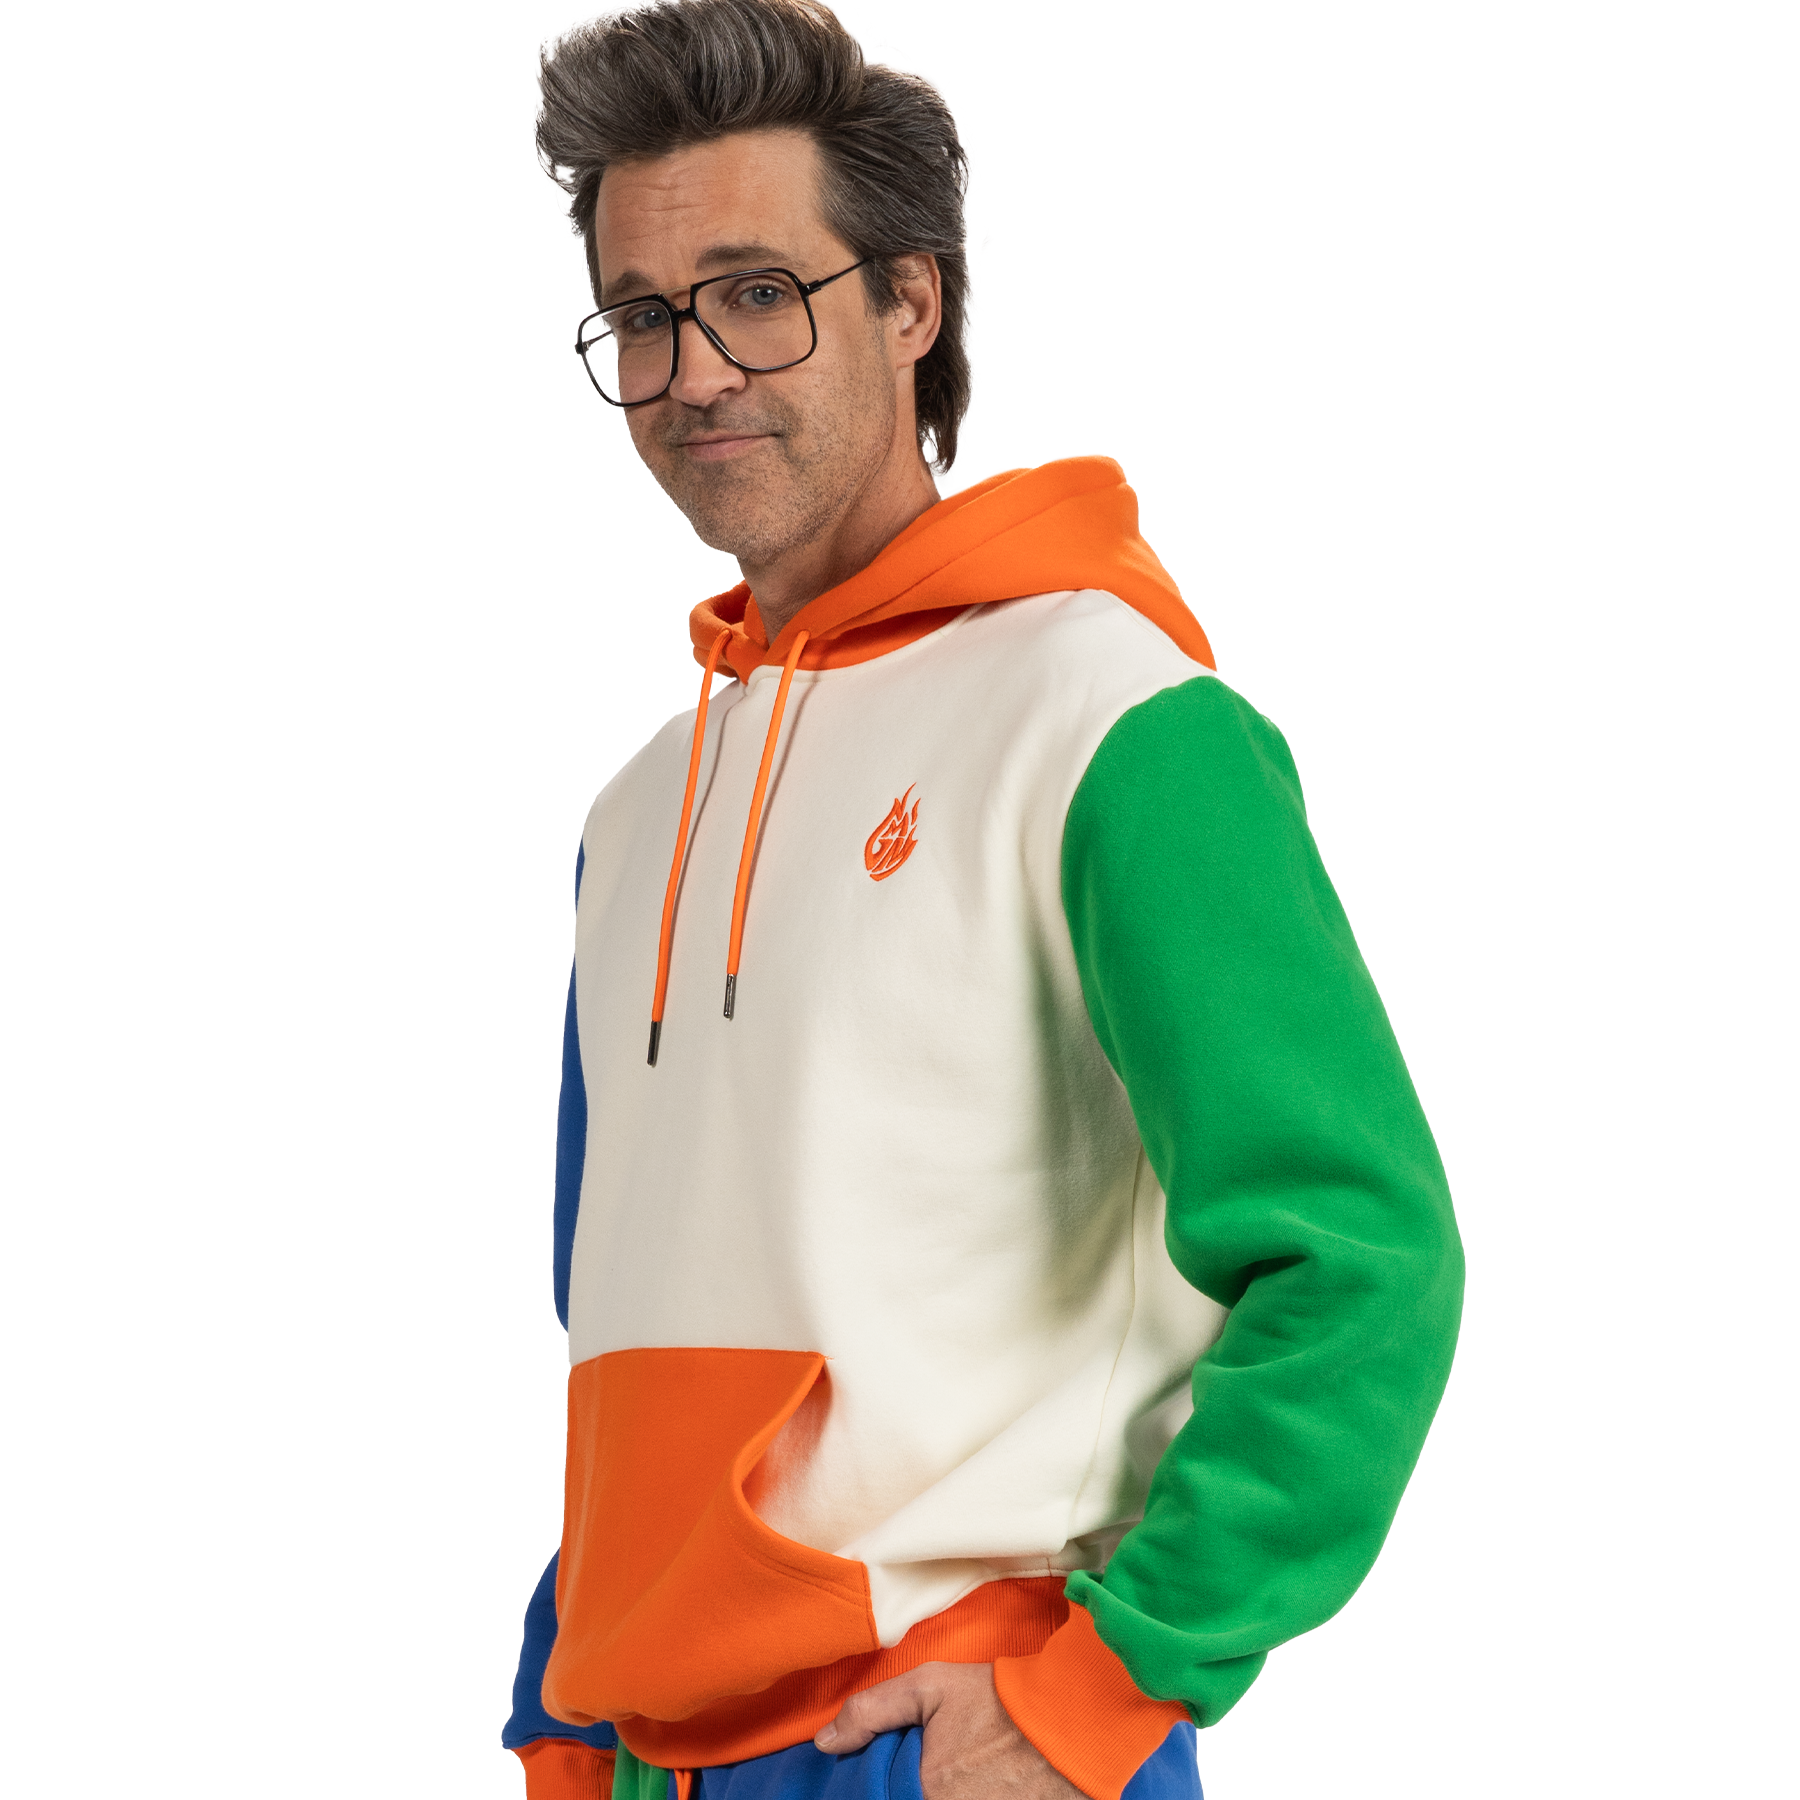 Let's Talk About That Colorblock Hoodie